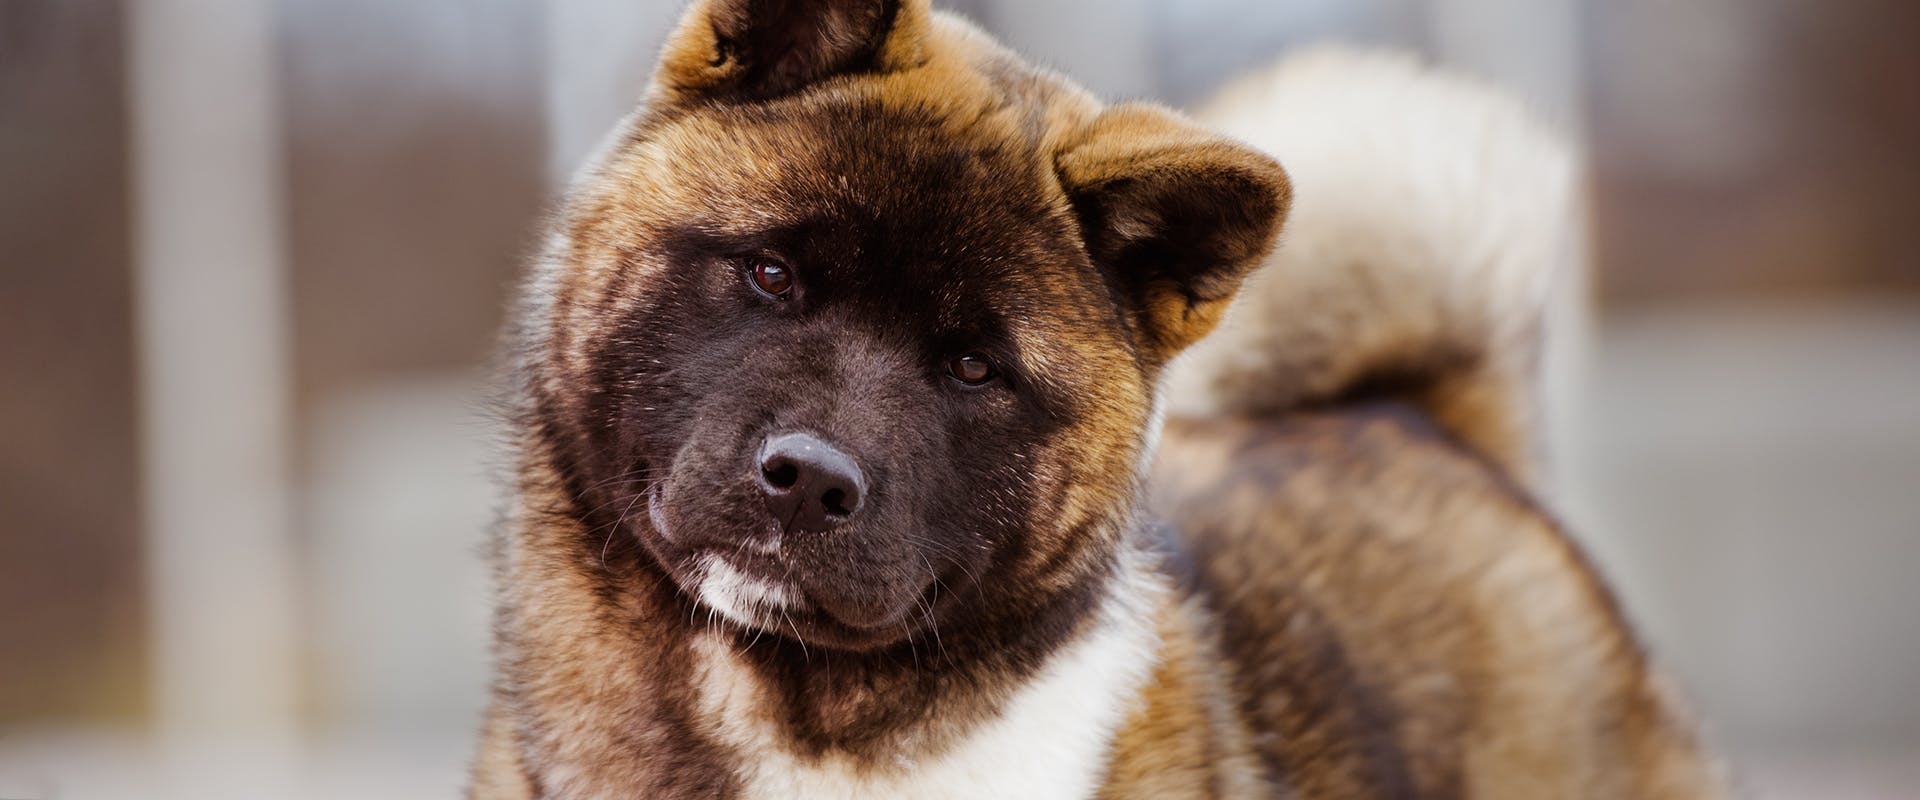 An American Akita with its head tilted, looking curiously at the camera